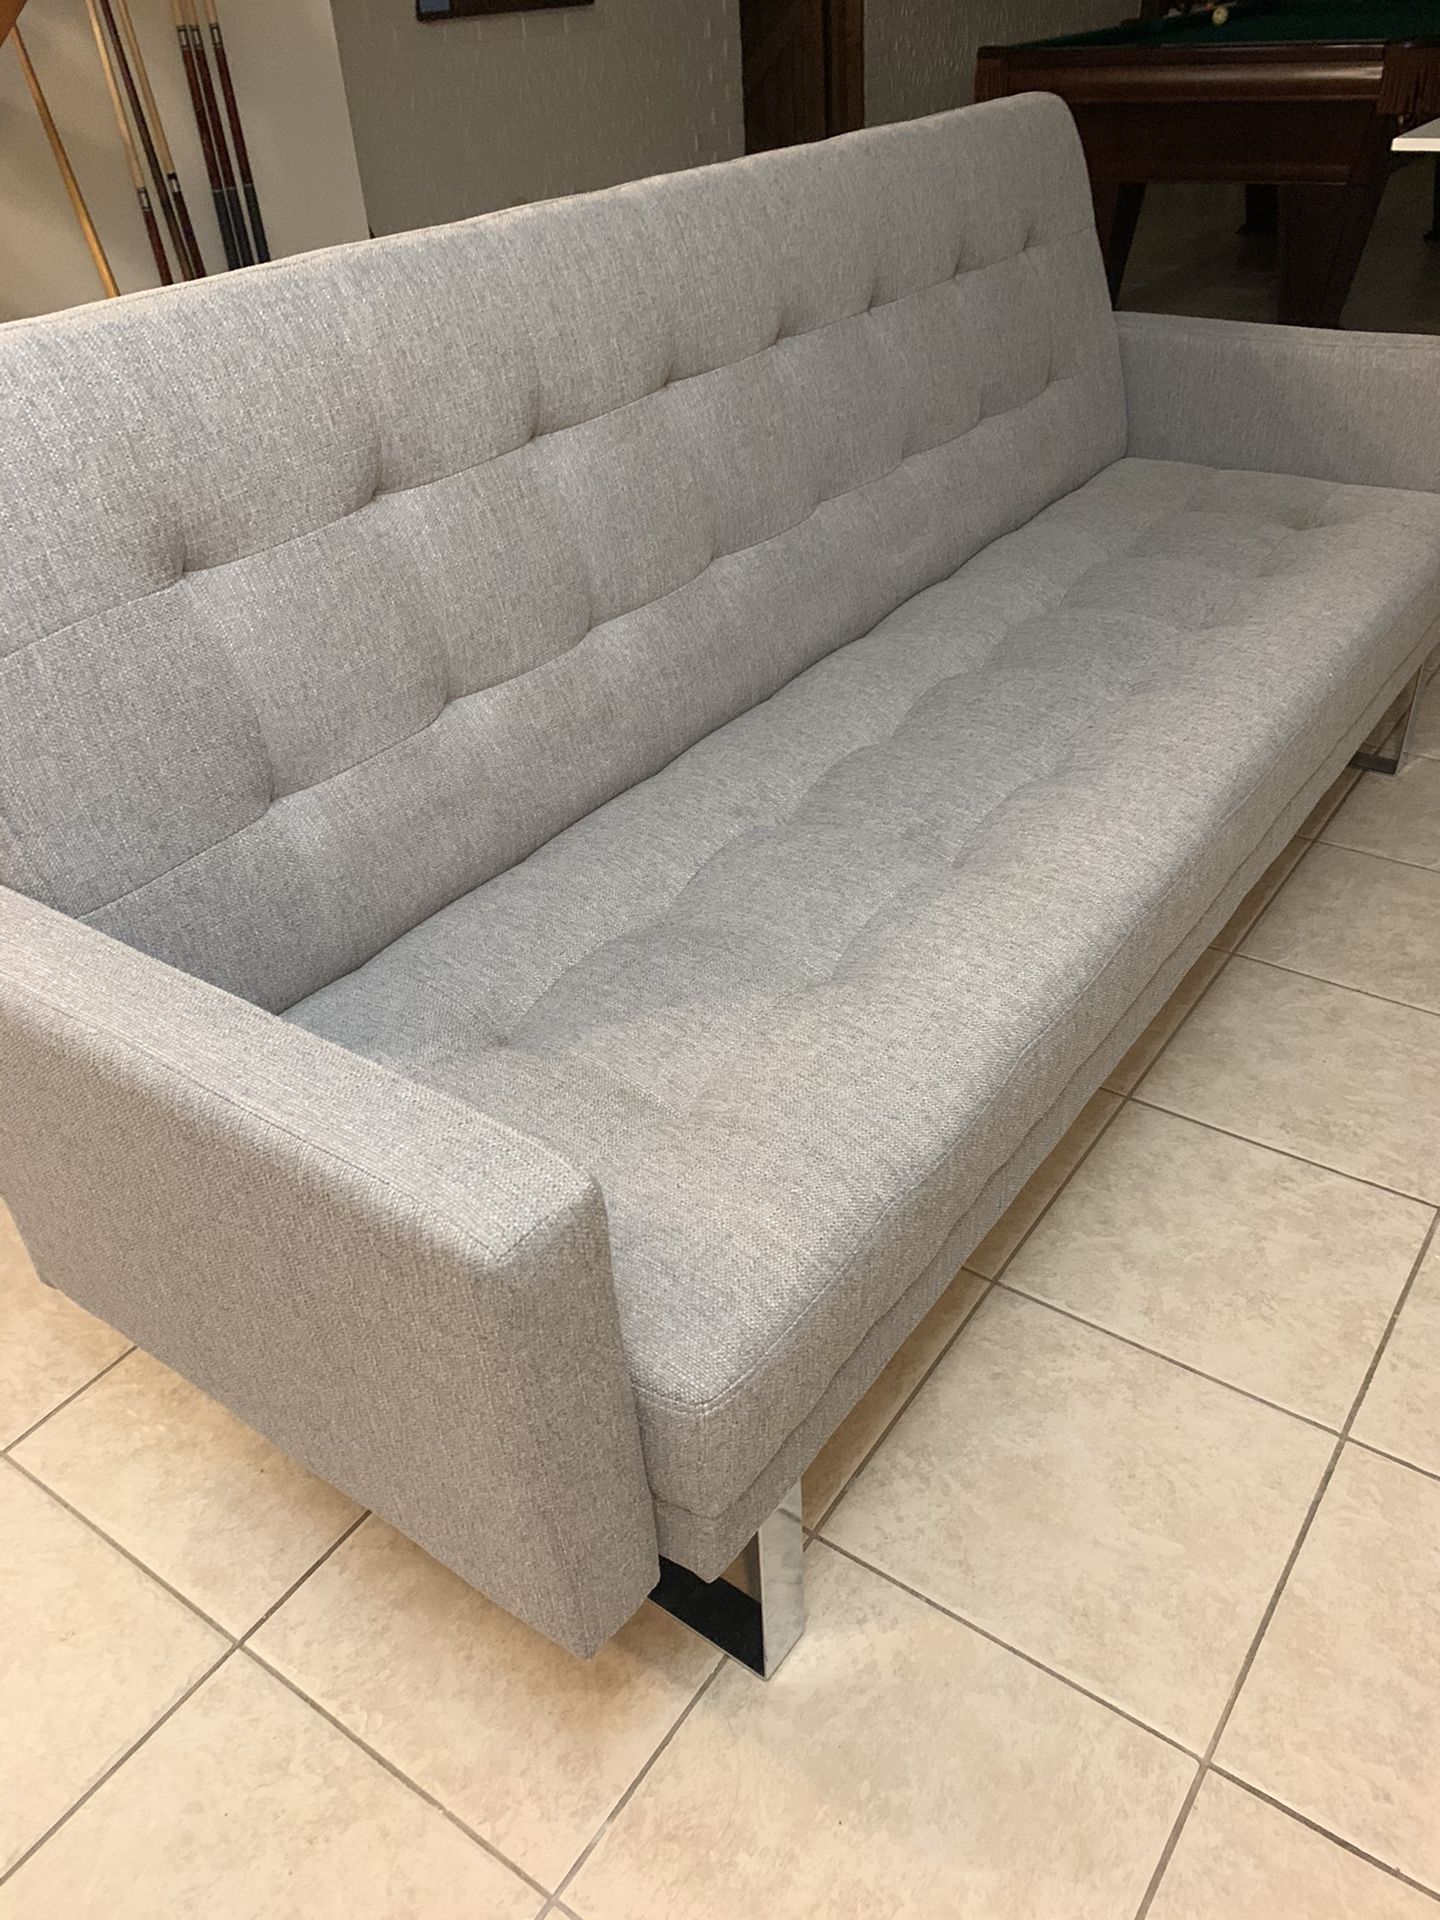 Sofa/couch convertible to bed